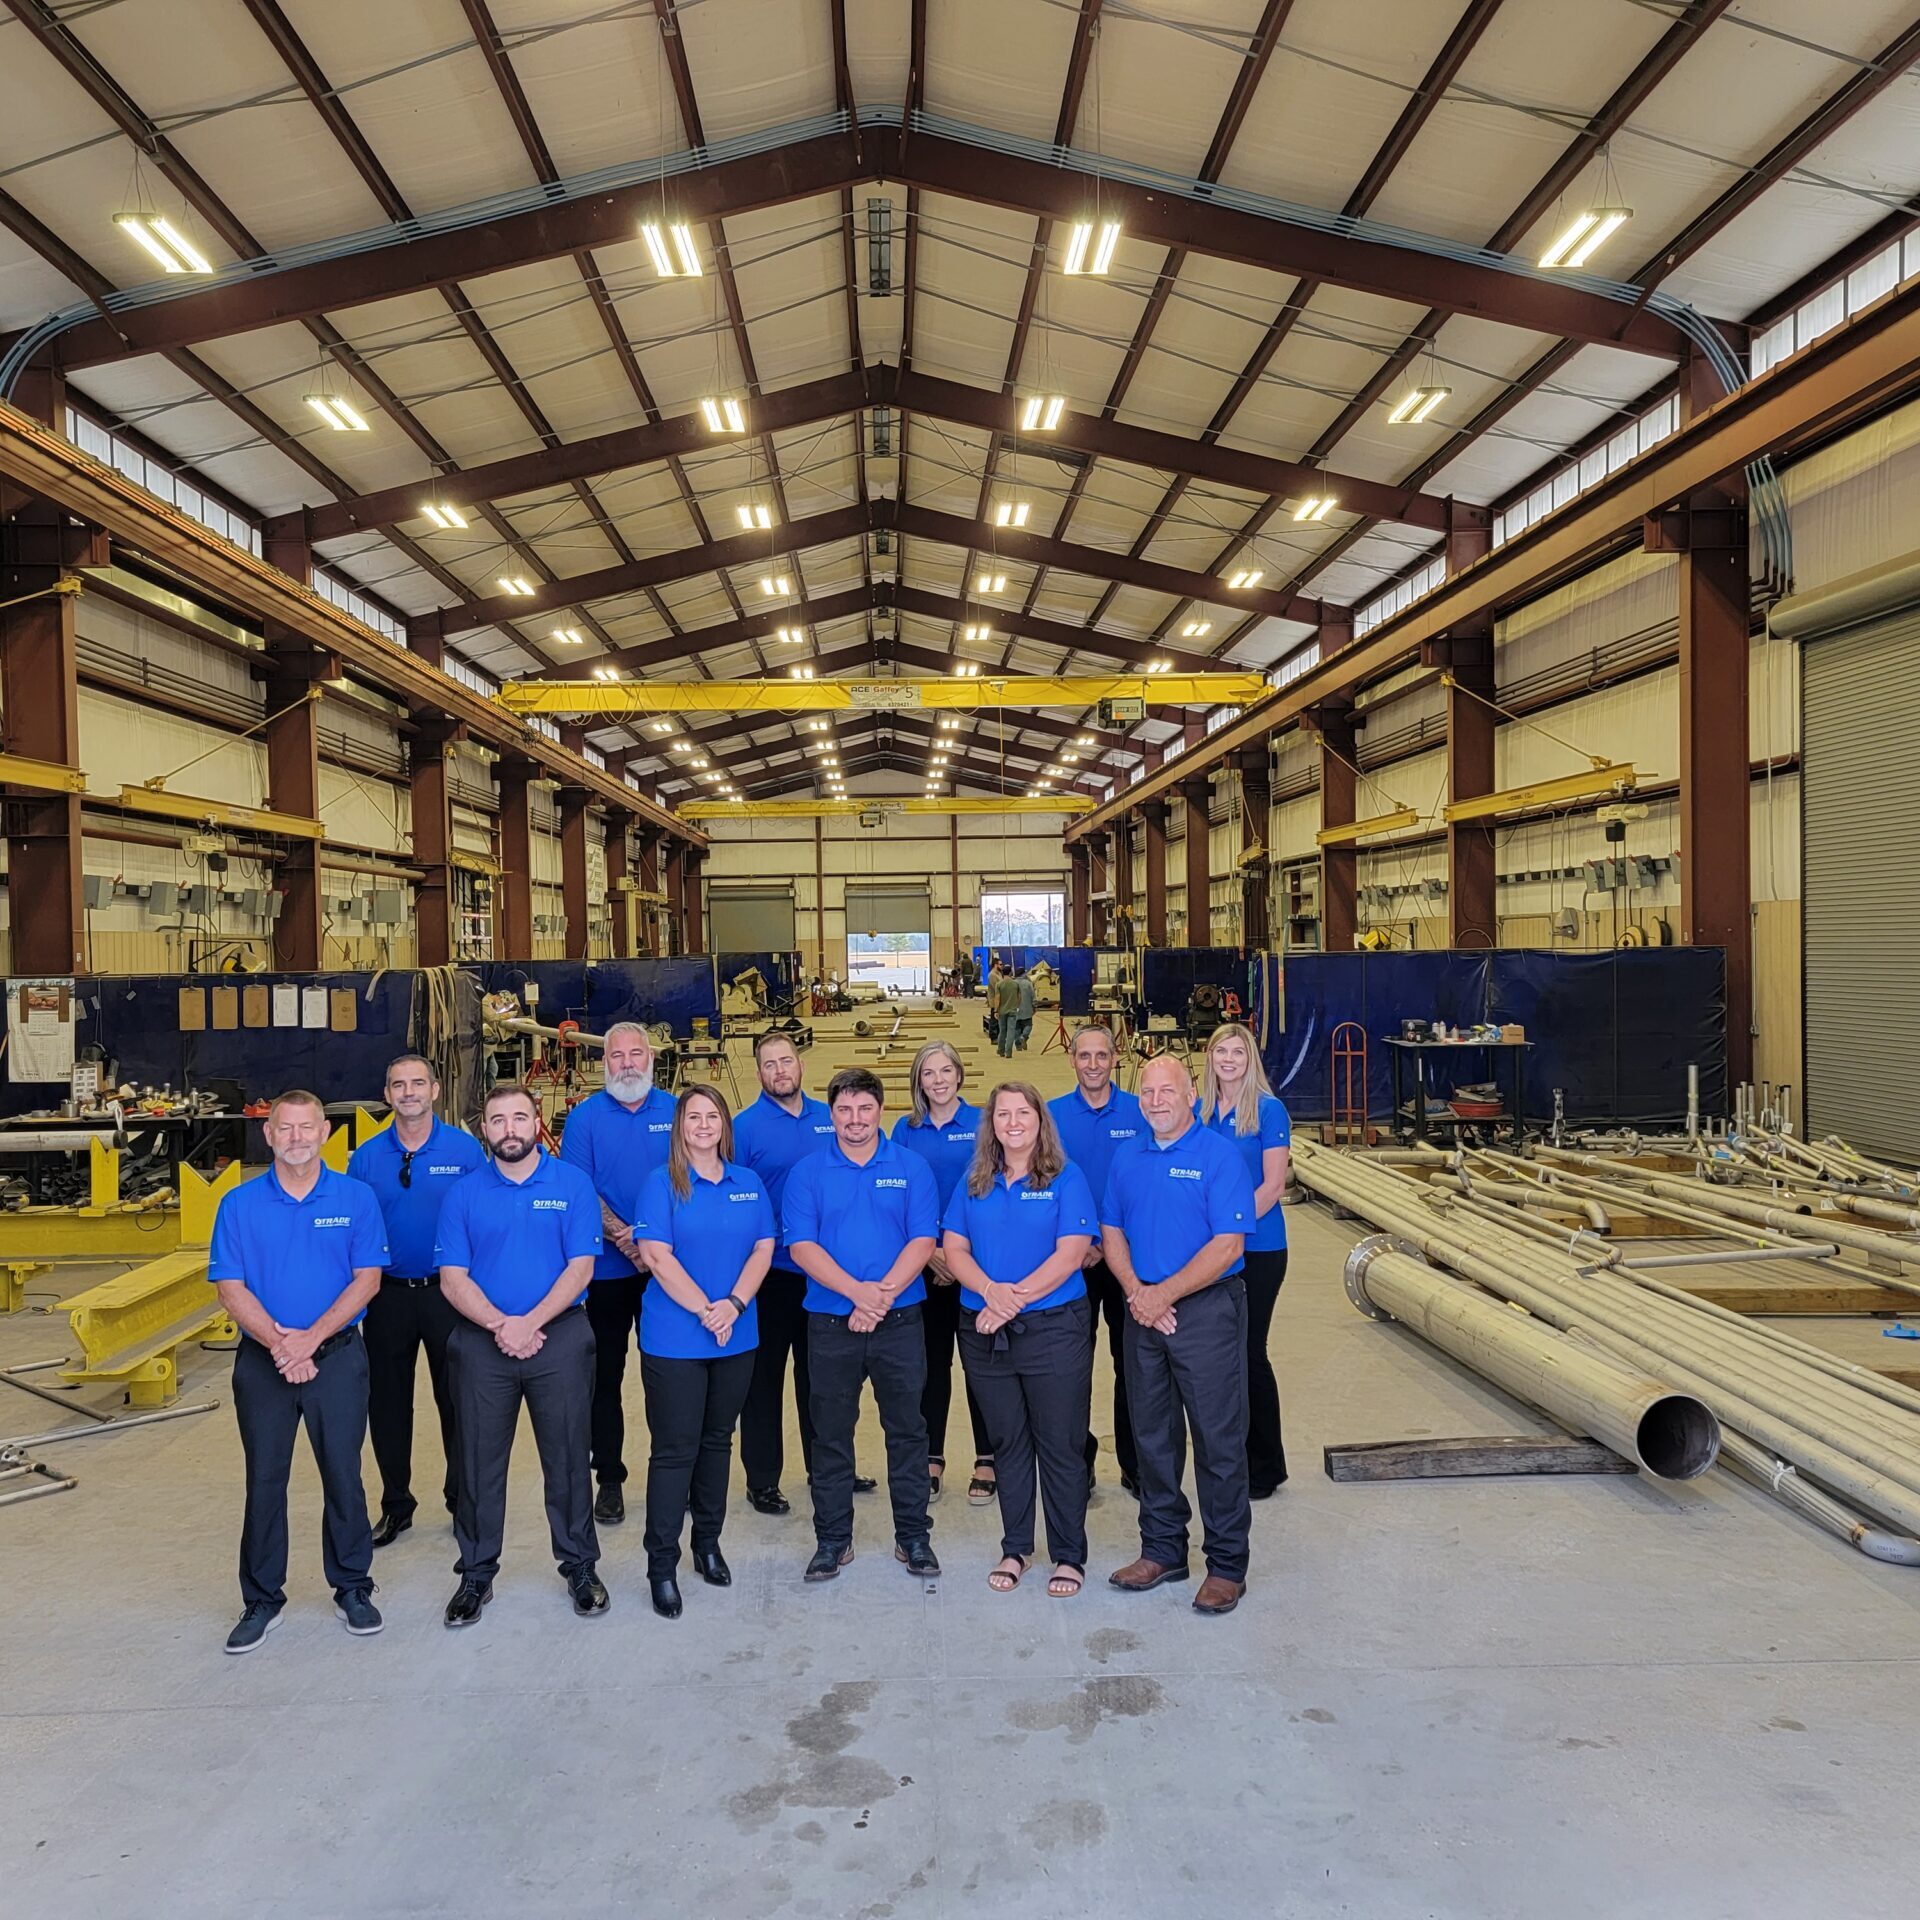 Twelve Trade team members standing for a group photo in a Trade warehouse.